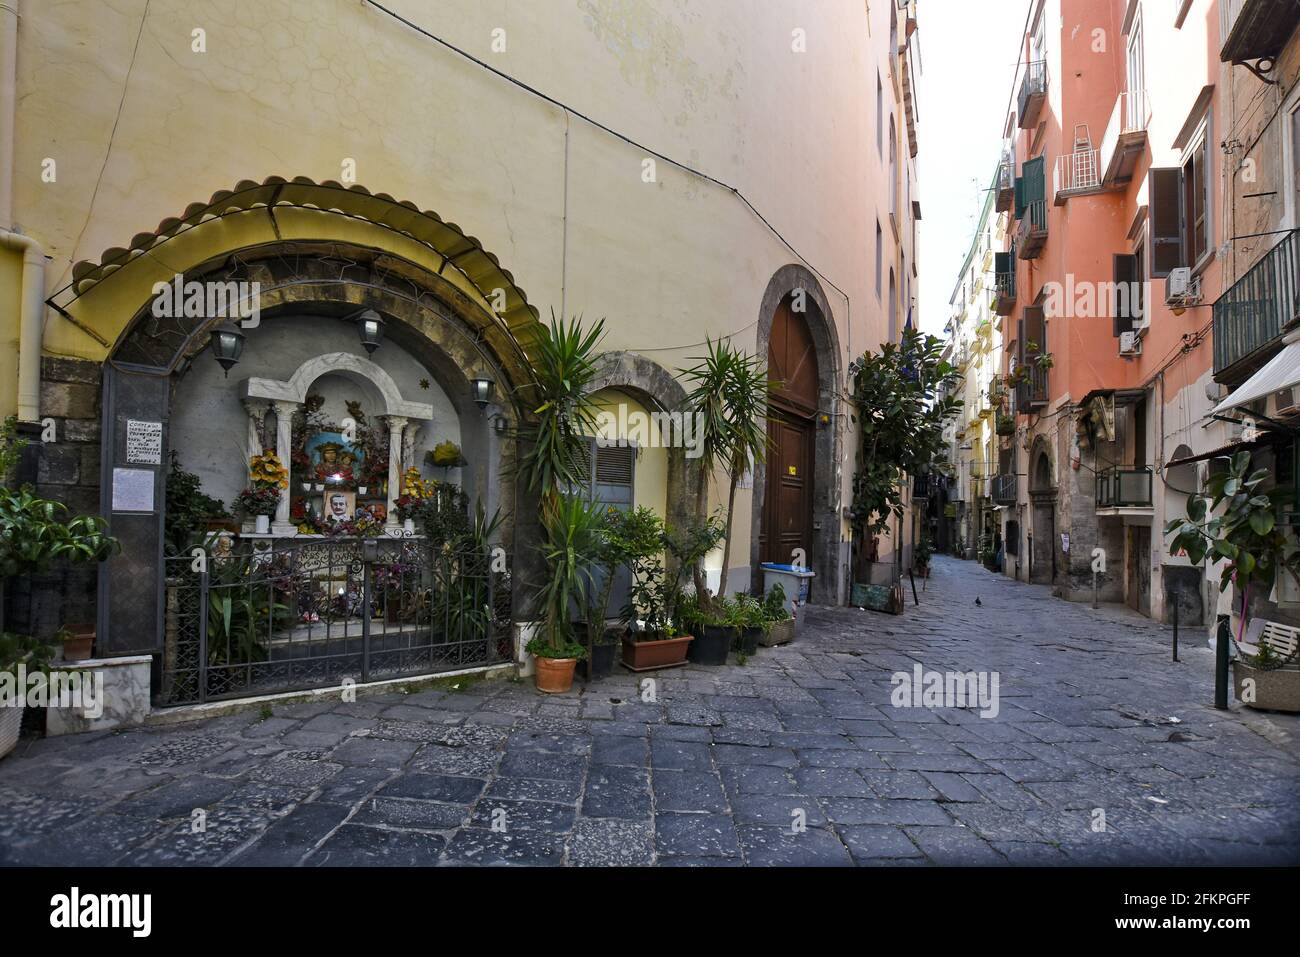 Naples, Italy, May 2, 2021. A place of prayer and religious devotion in a street of the medieval quarter. Stock Photo